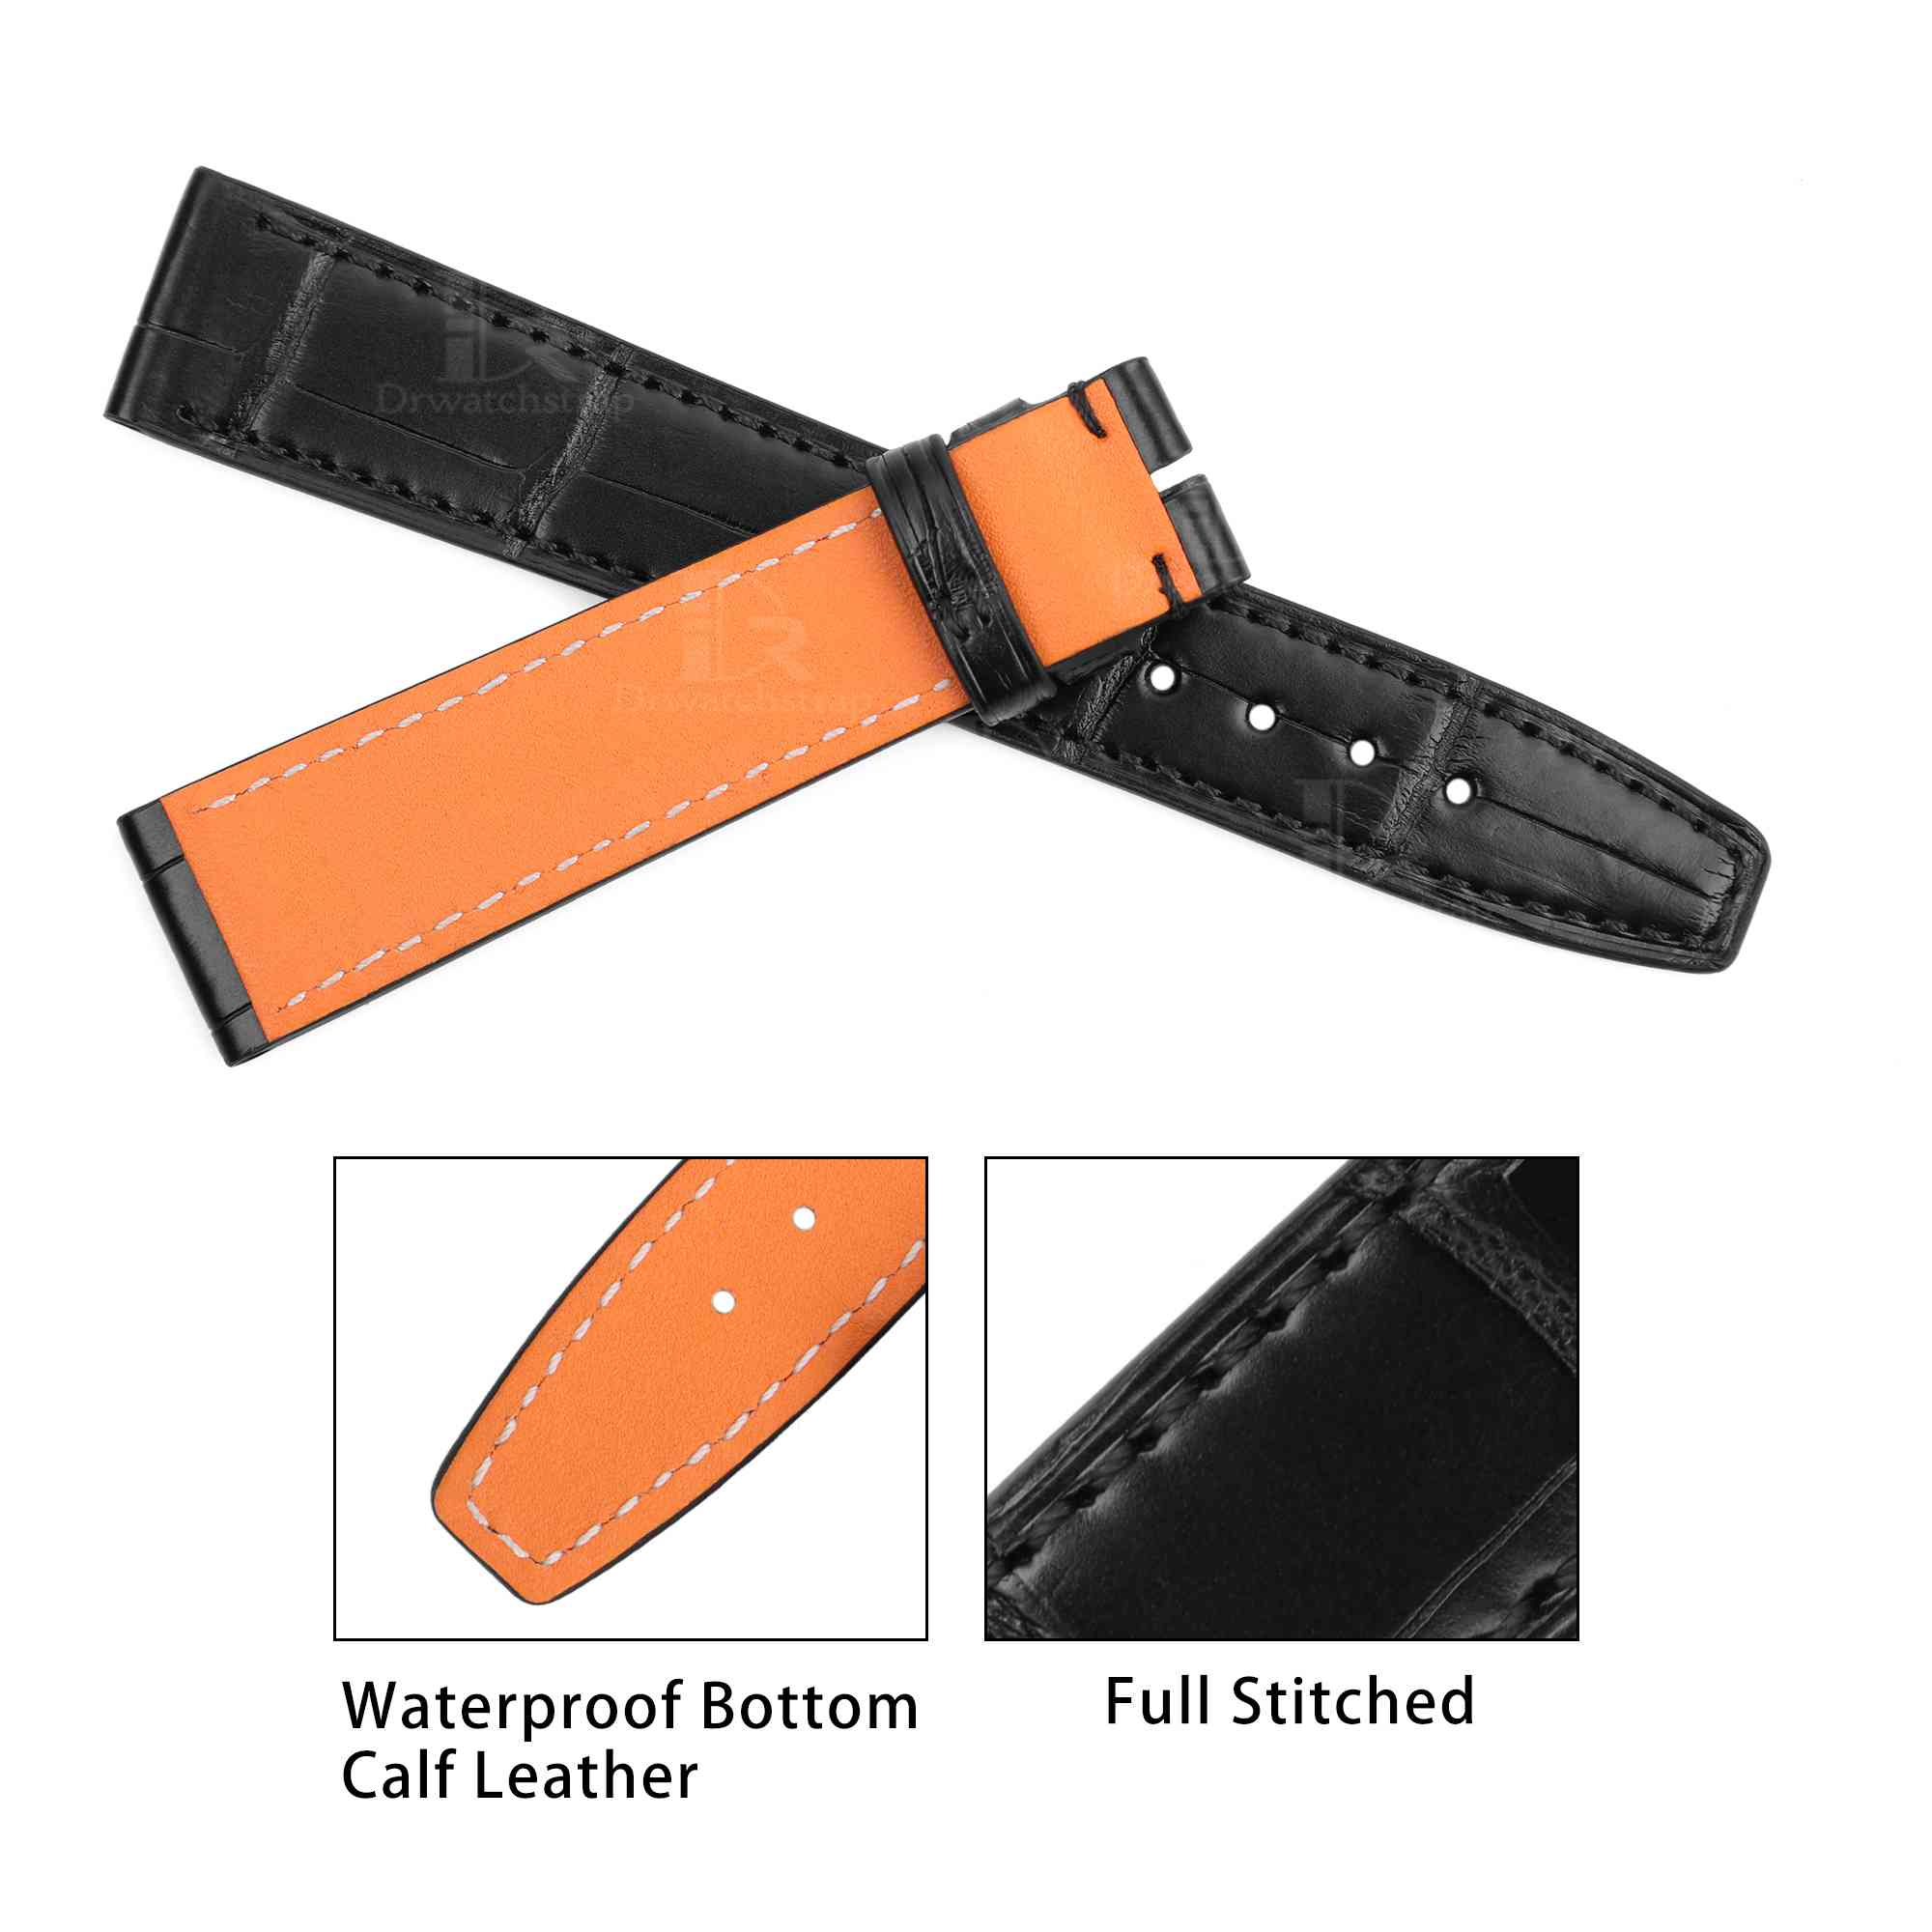 Custom best quality alligator replacement Black leather straps IWC Portofino Santoni strap and watch band online for sale fit for IWC Portofino, Pilot's, Portuguese luxury watches